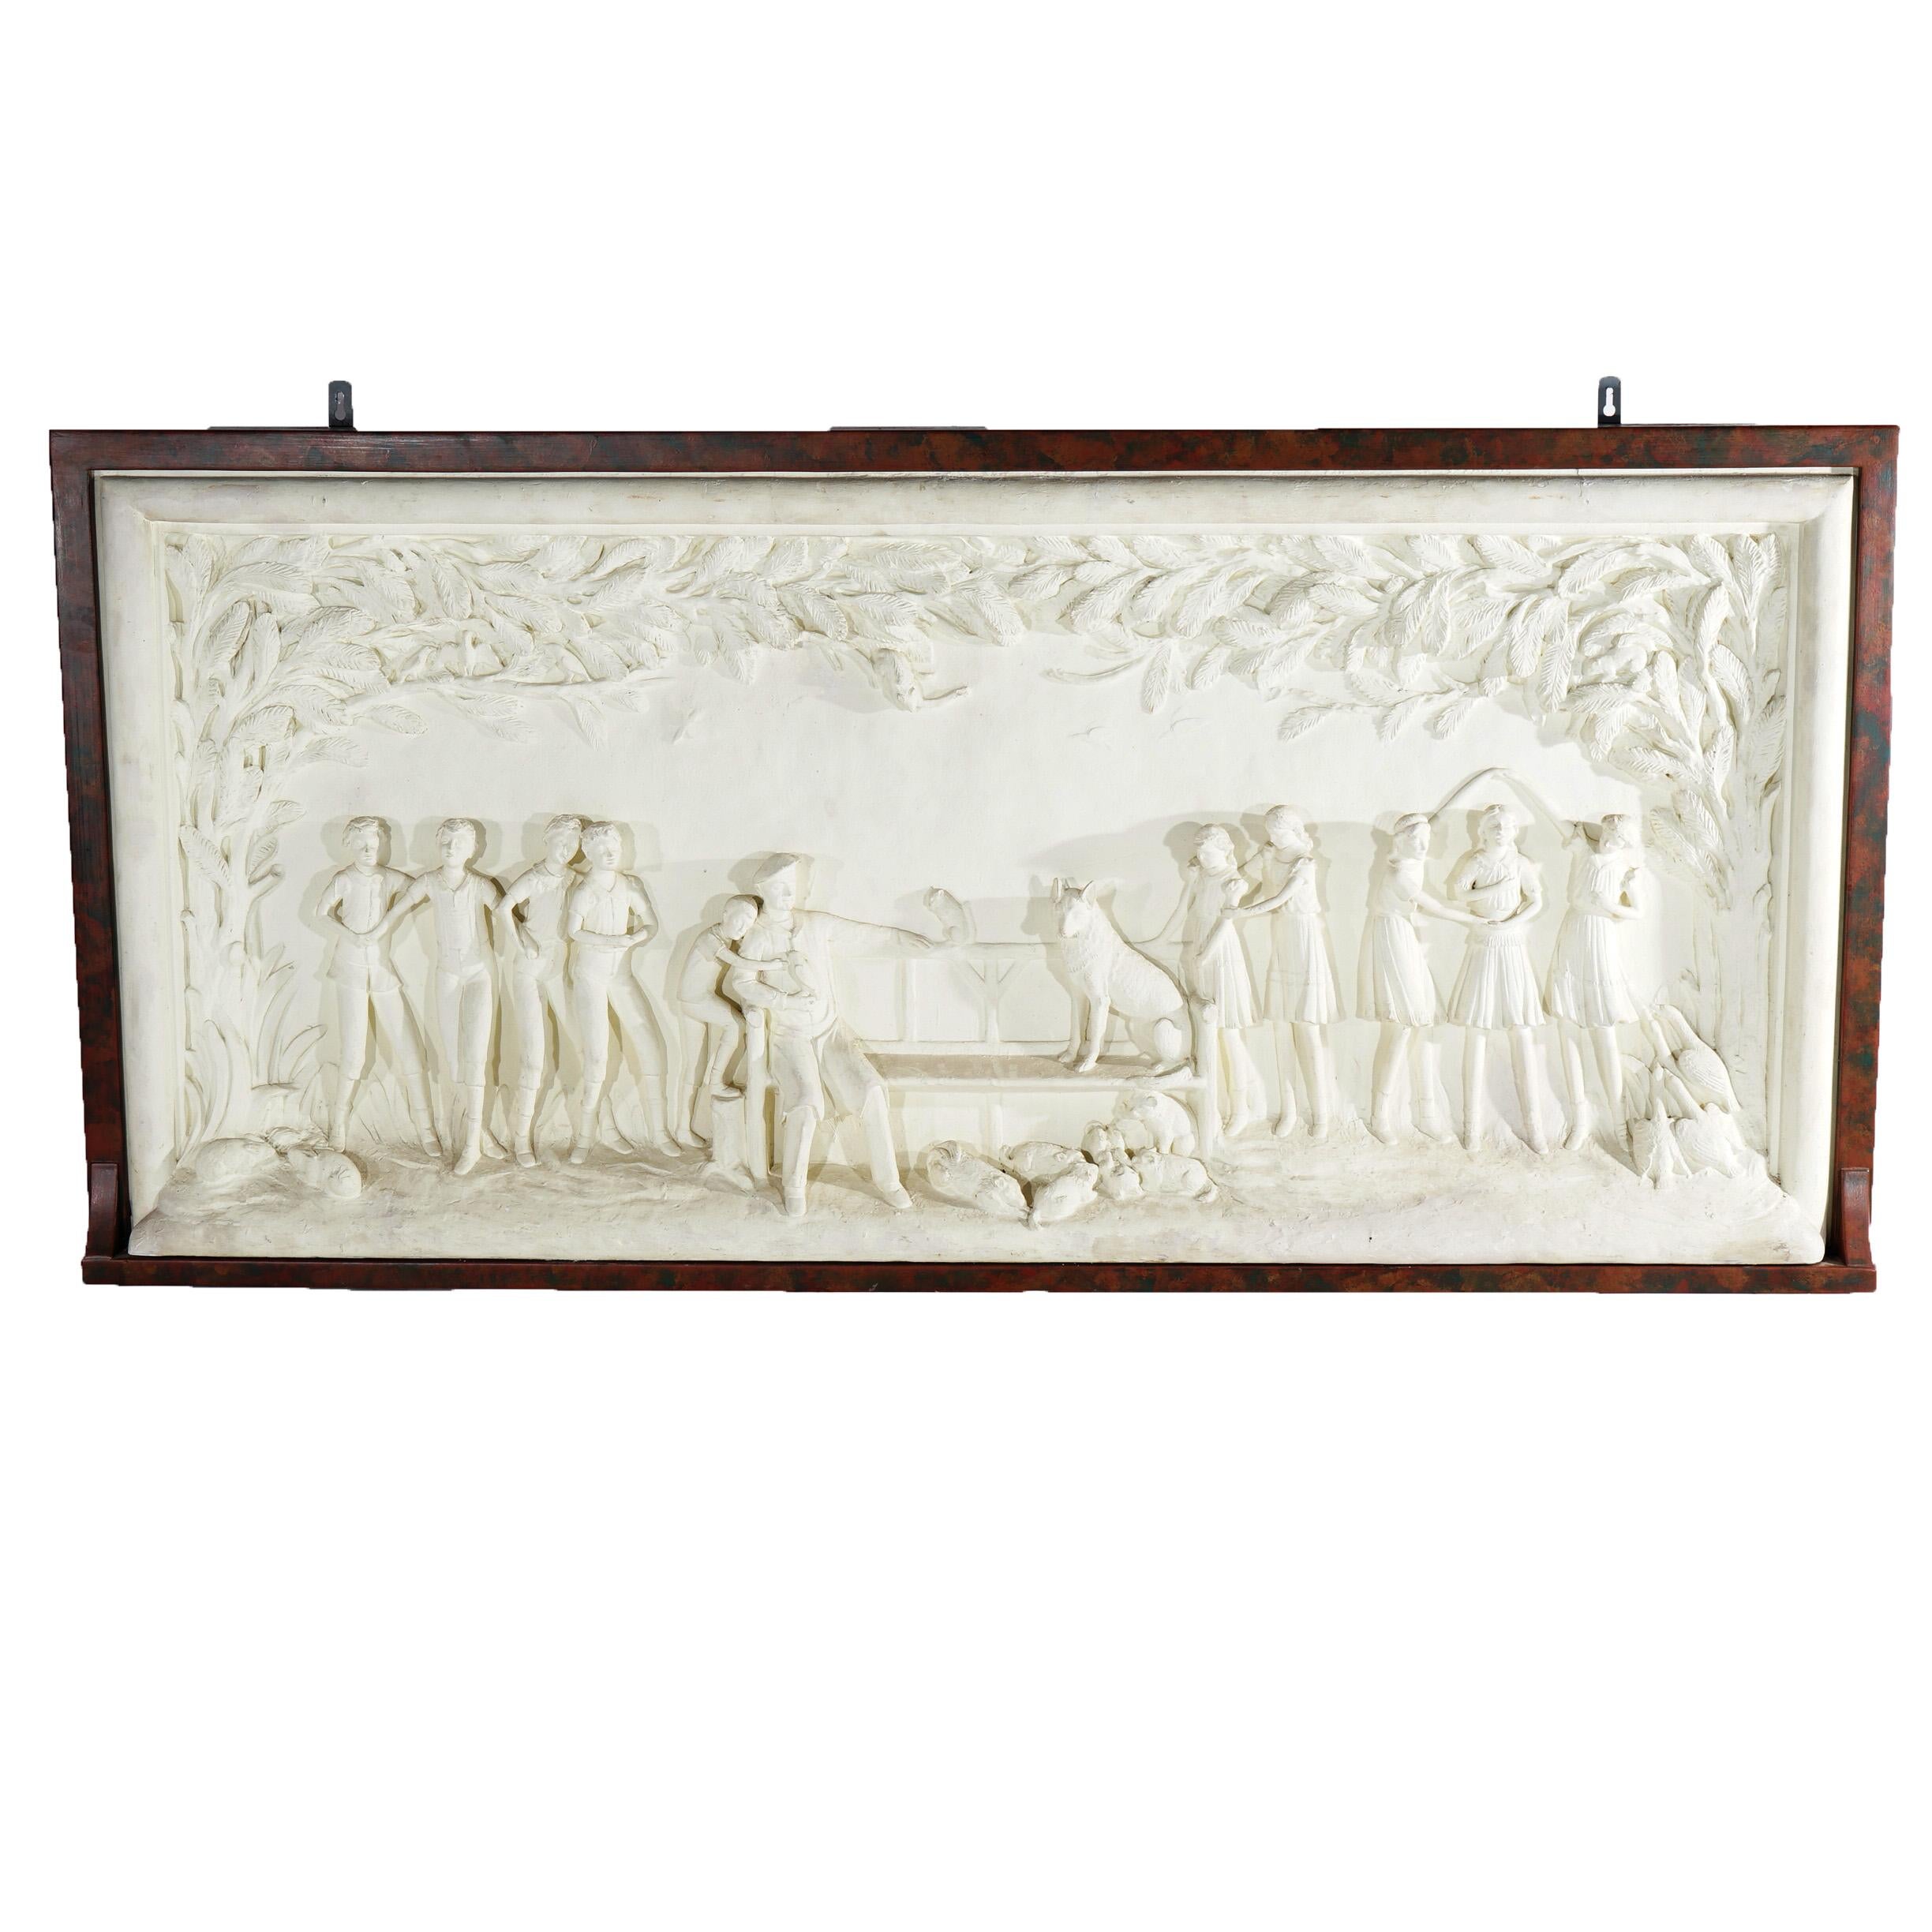 A large antique figural grouping wall sculpture offers framed plaster in high relief with farm scene having grandfather, children and farm animals, c1920

Measures - 37.25